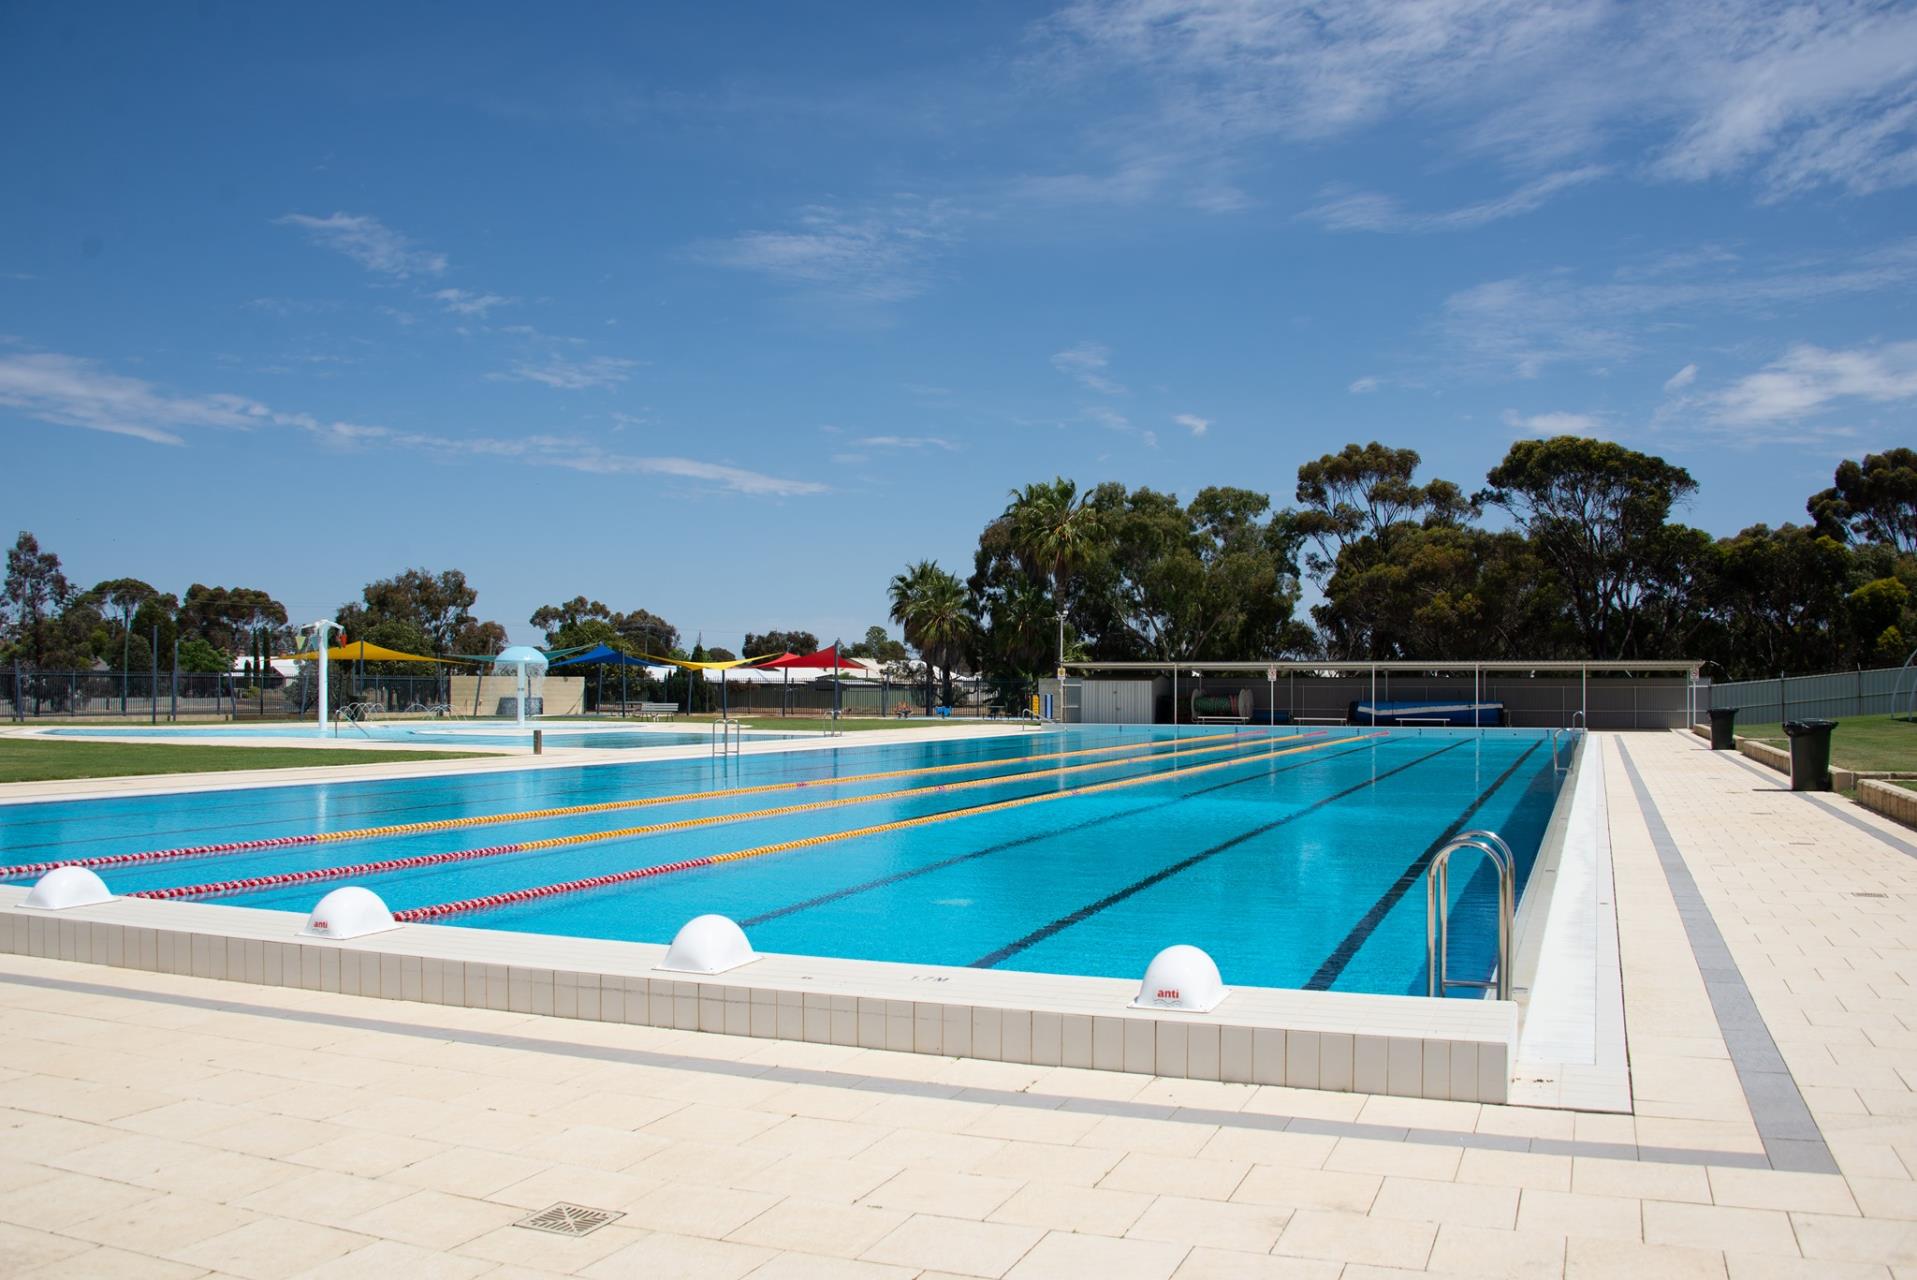 Katanning Youth: Free Pass to the Pool